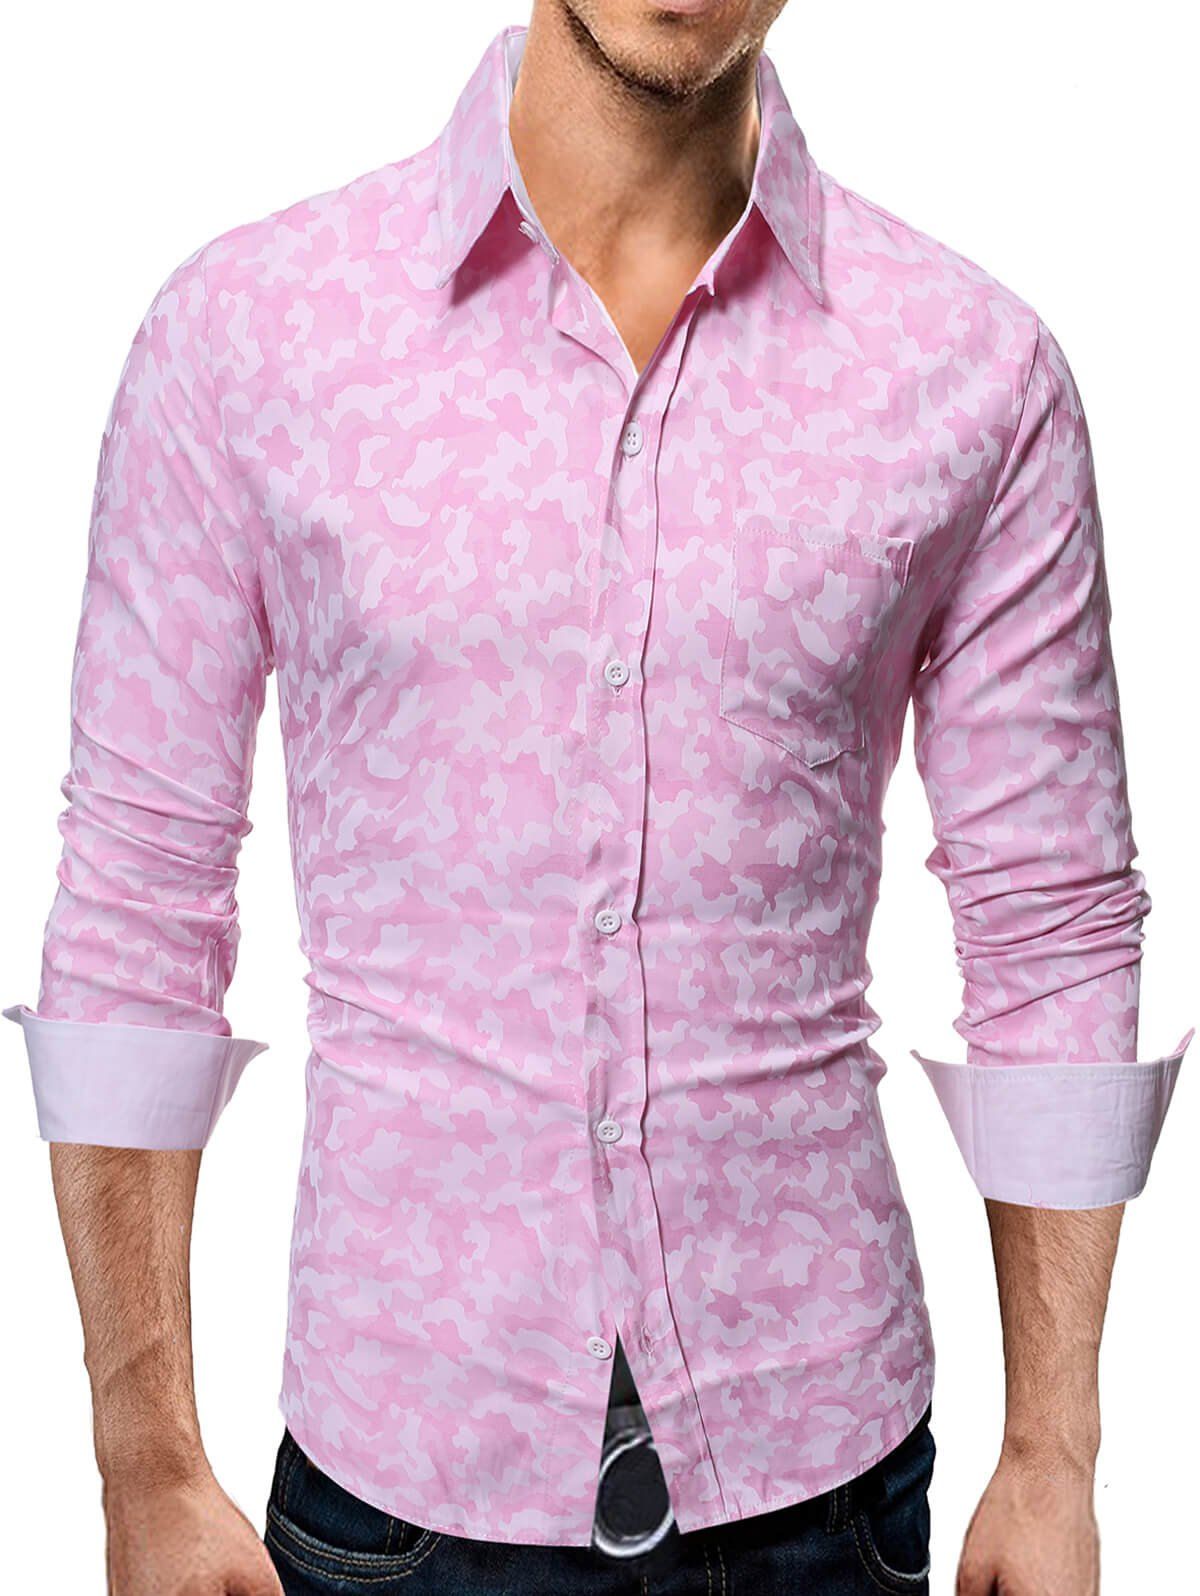 

Camouflage Print Button Slim Fit Shirt, Pink